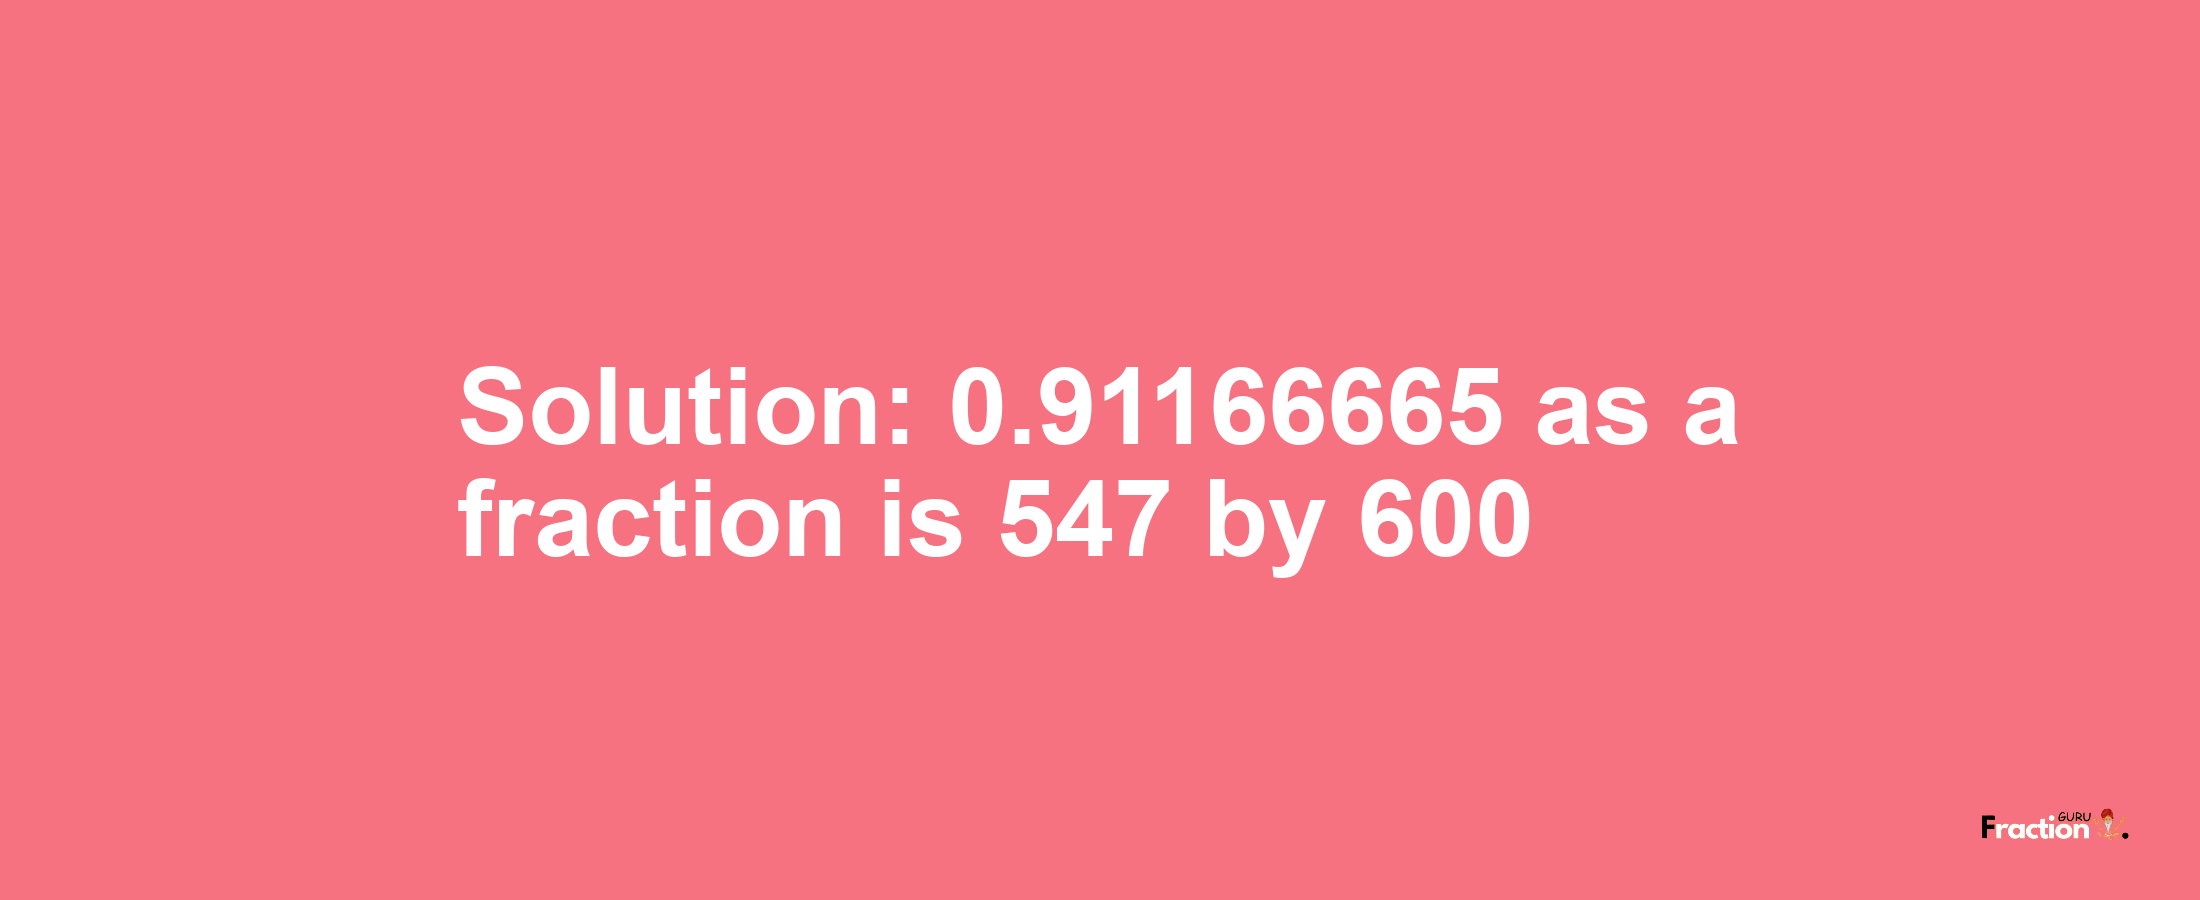 Solution:0.91166665 as a fraction is 547/600